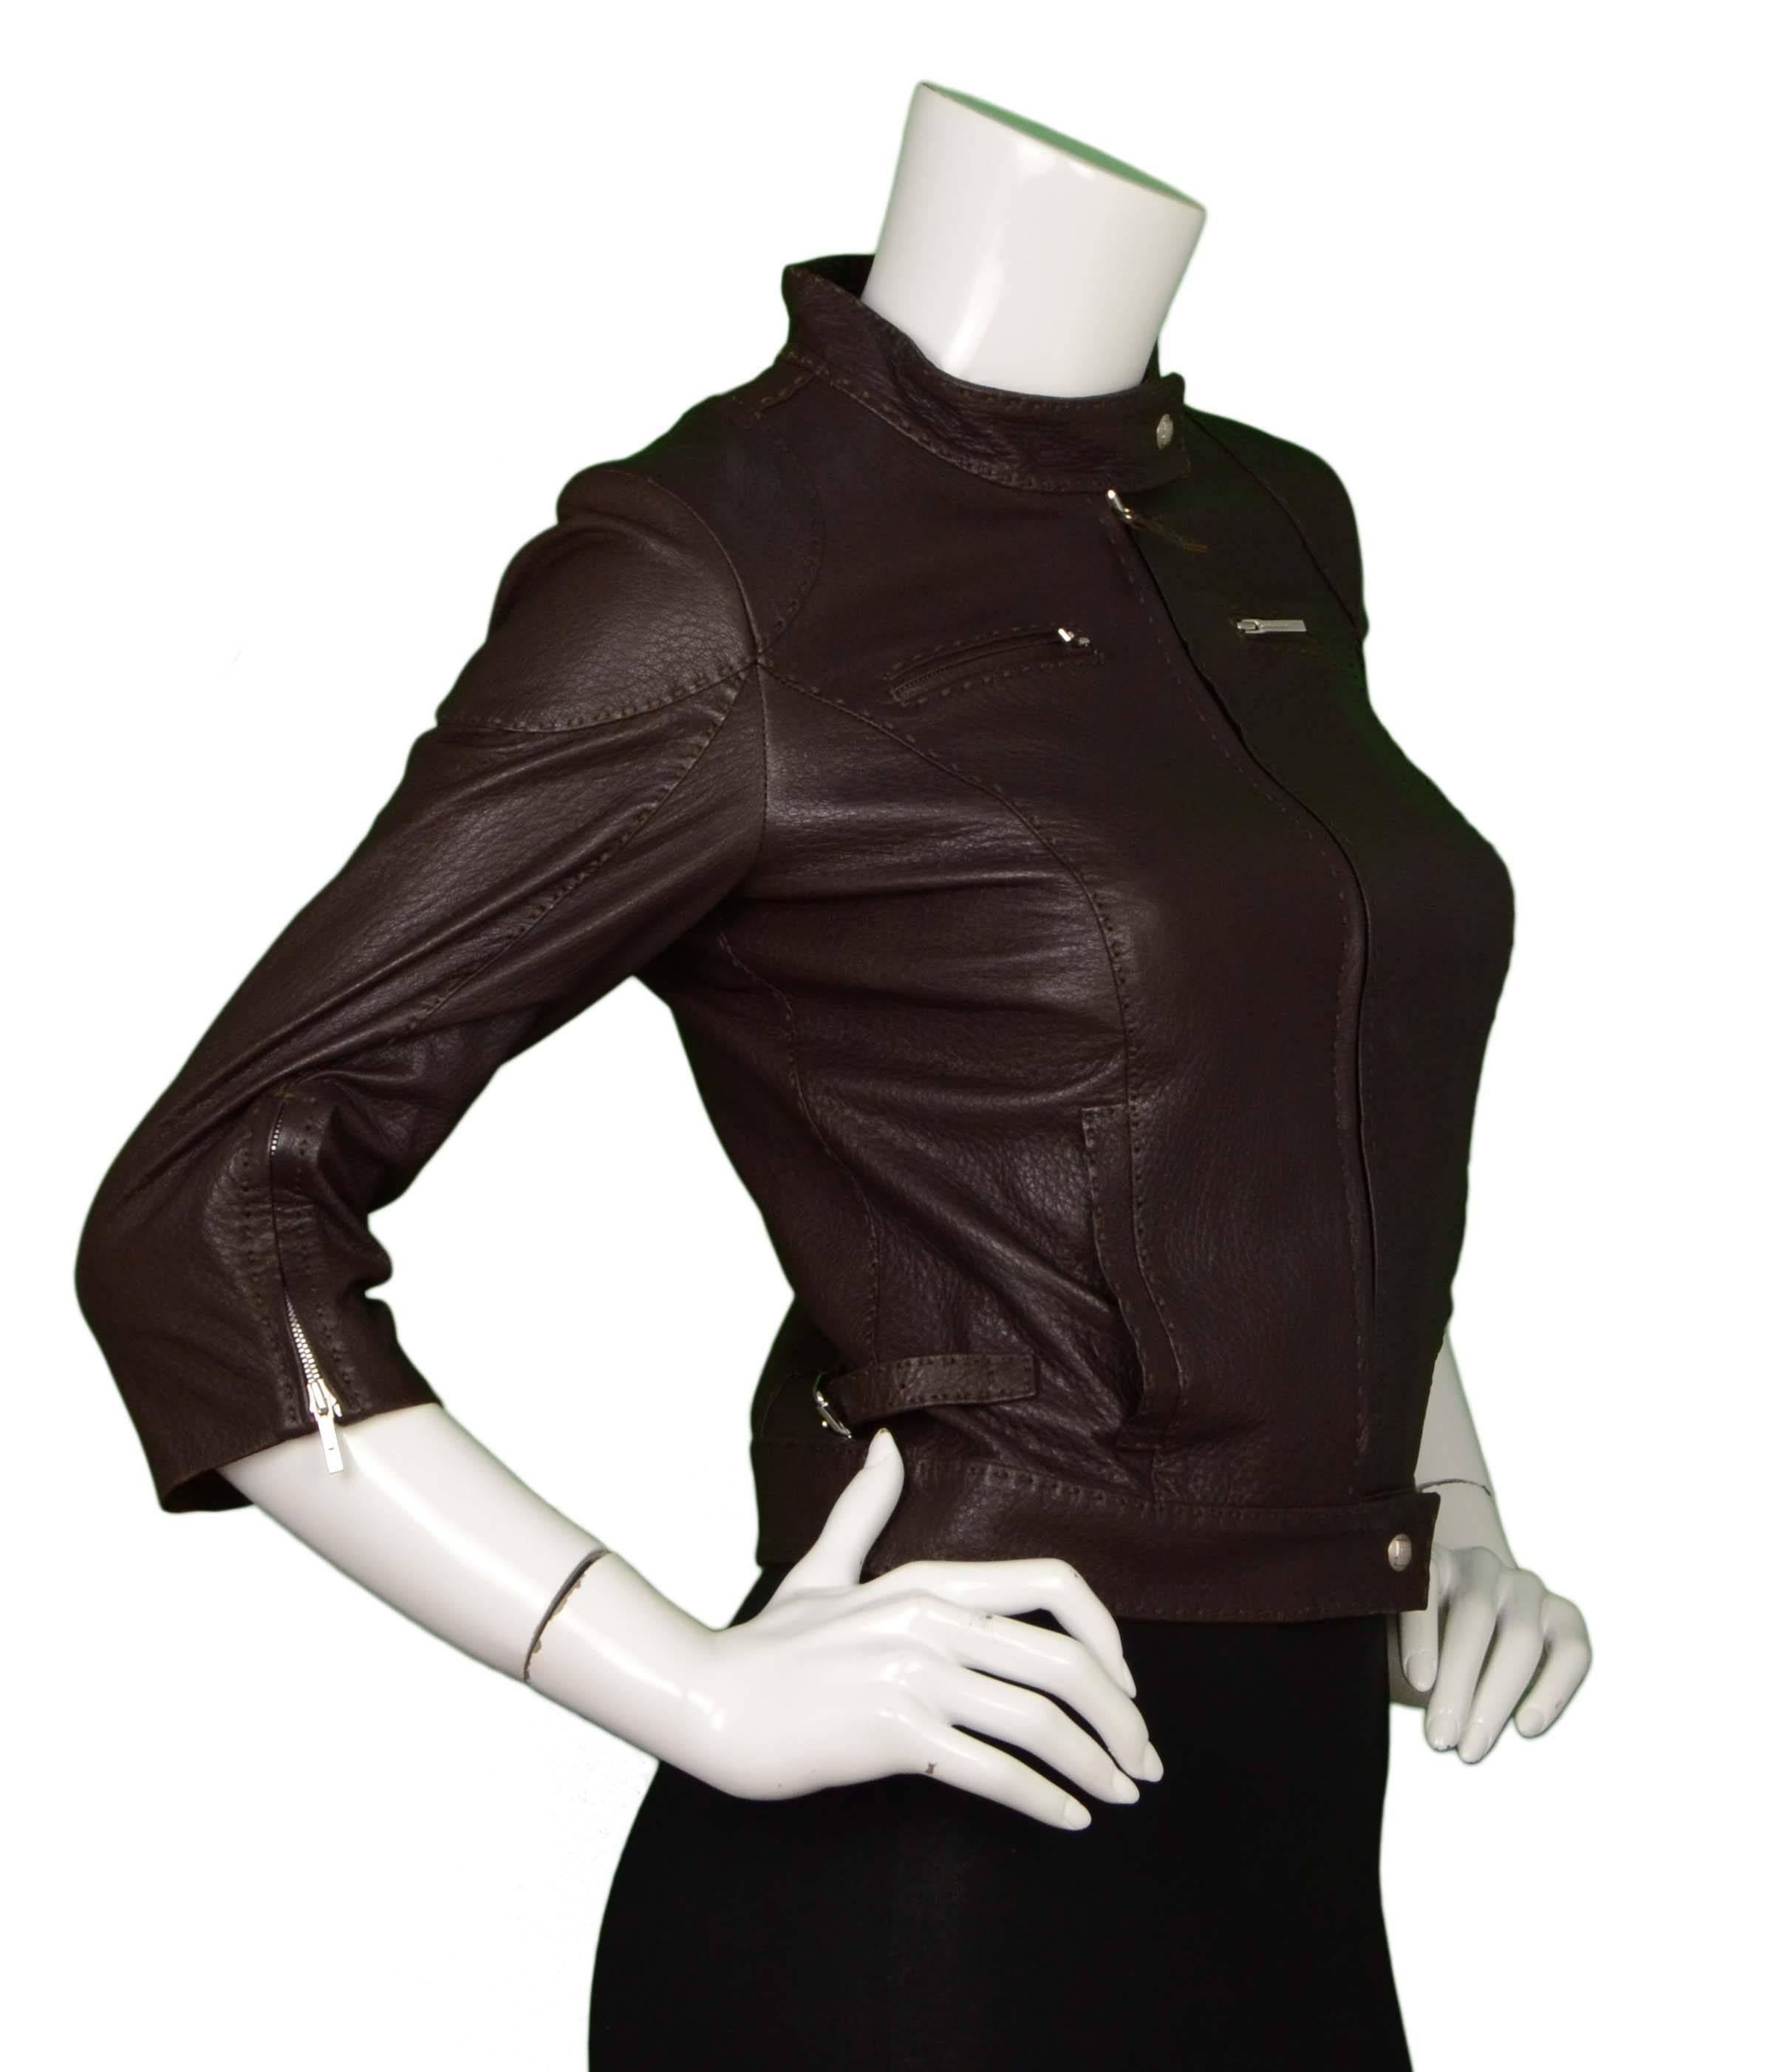 Fendi Brown Leather Cropped Jacket 
Features thick brown stitched detailing throughout exterior
Made In: Italy
Color: Brown
Composition: 100% leather
Lining: Tan, 100% cupro
Closure/Opening: Front center zip up
Exterior Pockets: Two hip